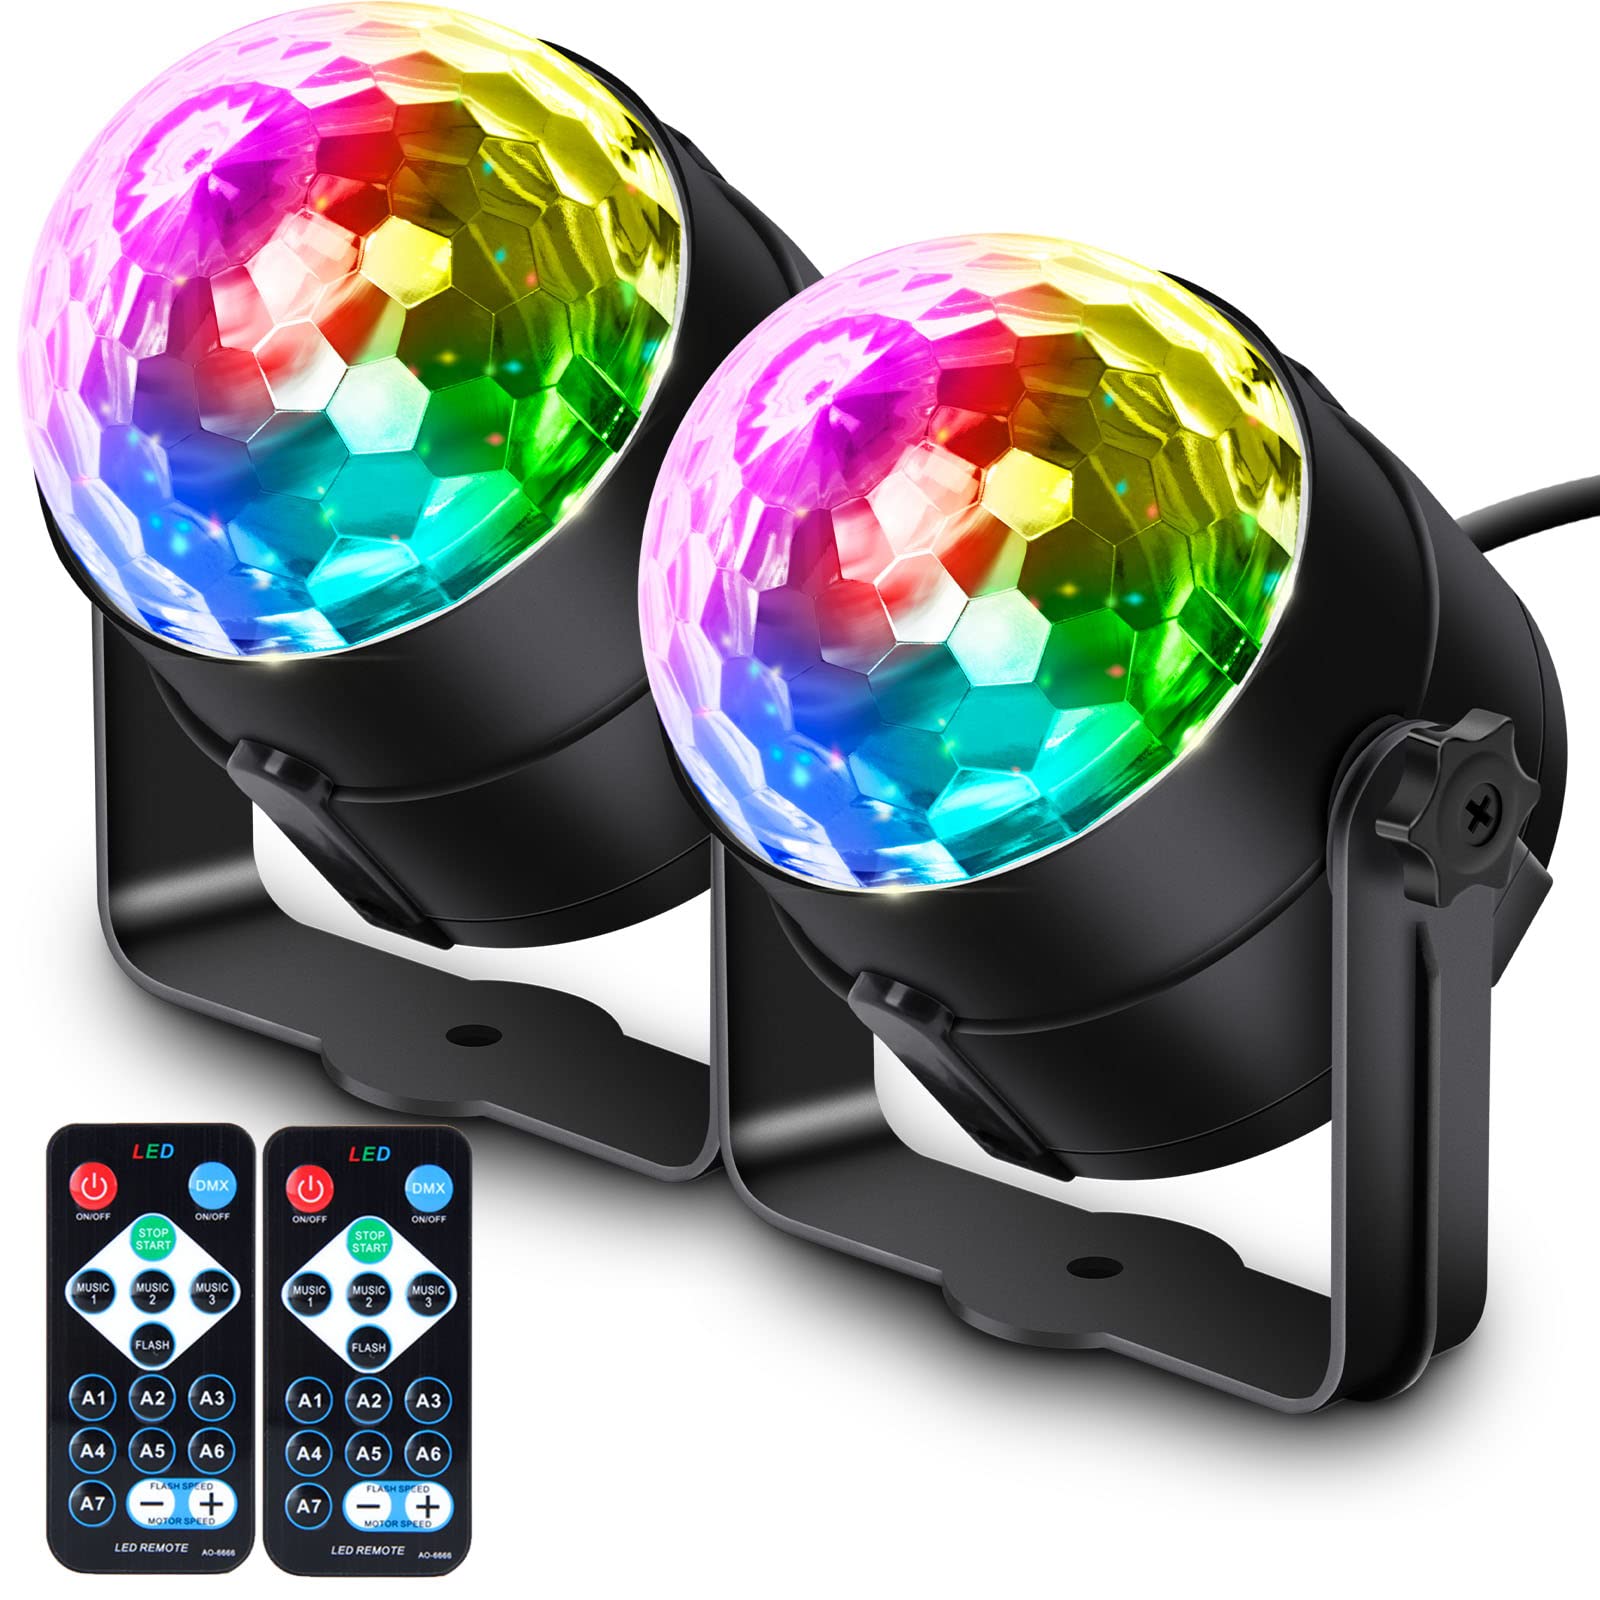 Apeocose [2-Pack] Disco Ball DJ Lights, Sound Activated RGB Party Light Rotating Stage Strobe Lamp with Wireless Remote for Halloween Decorations Christmas Room Decor Birthday Bachelorette Party Zumba